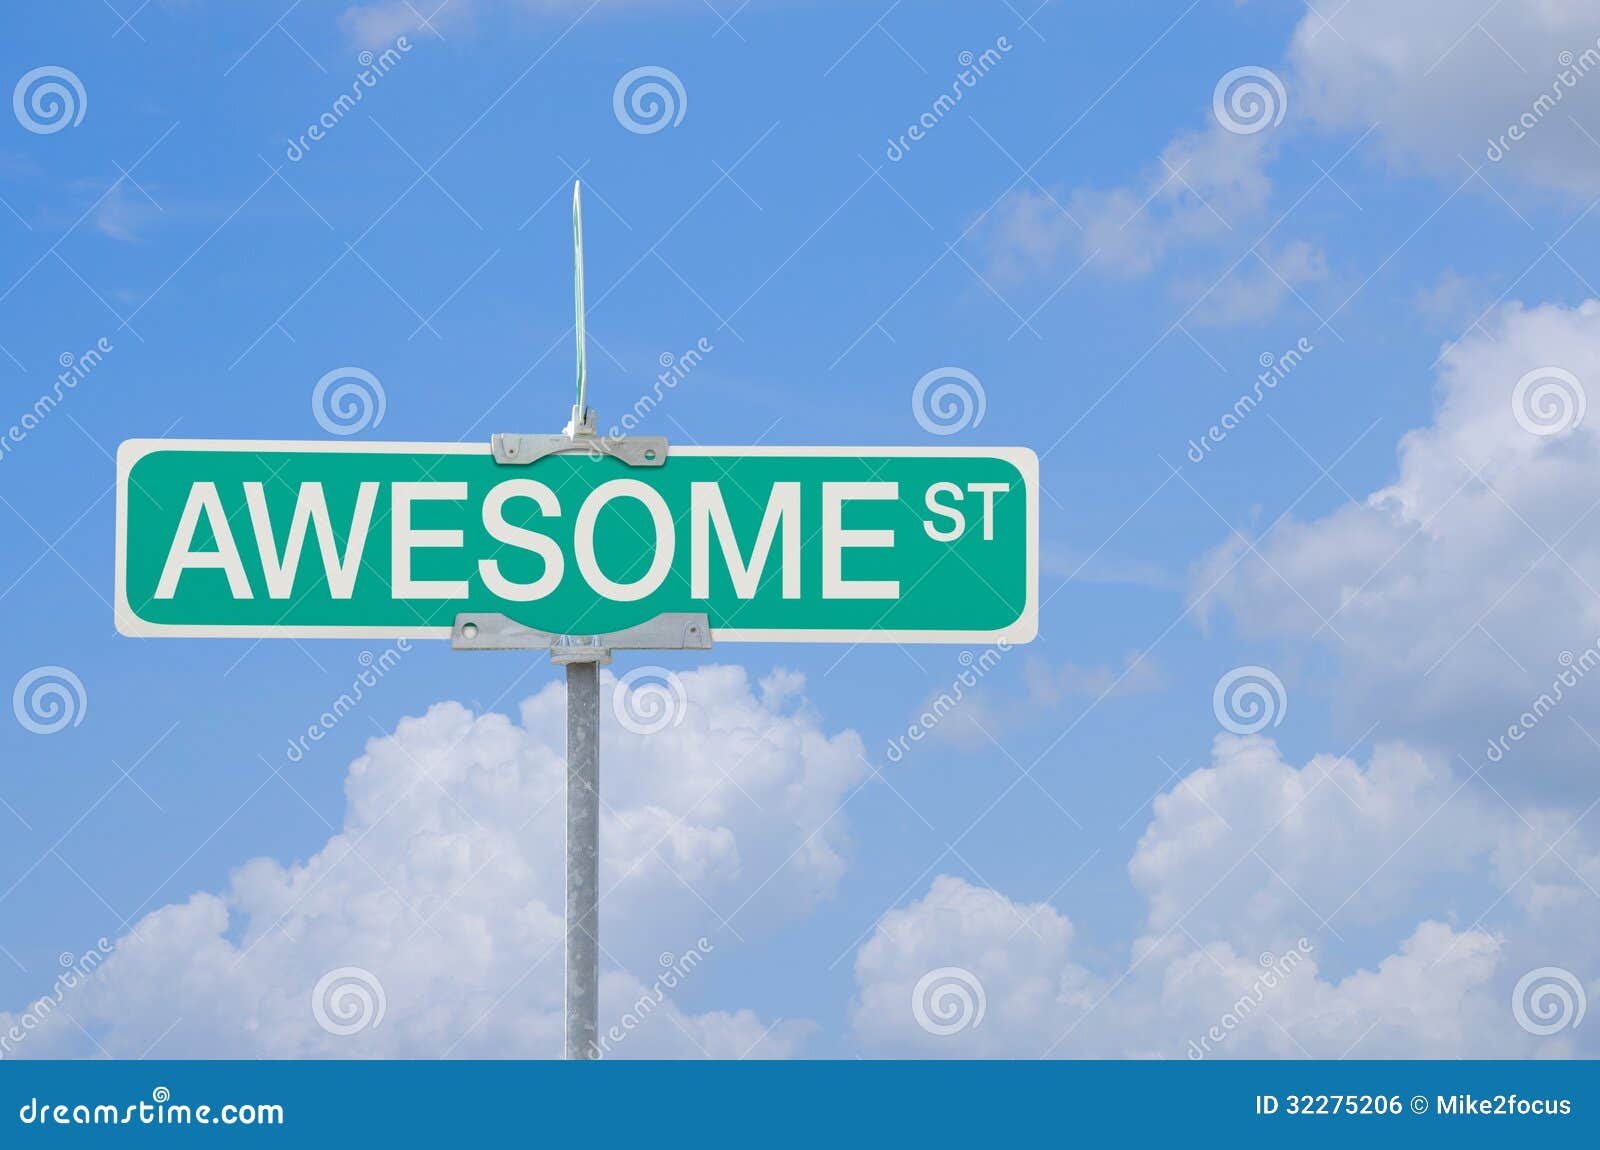 awesome street sign with blue sky background